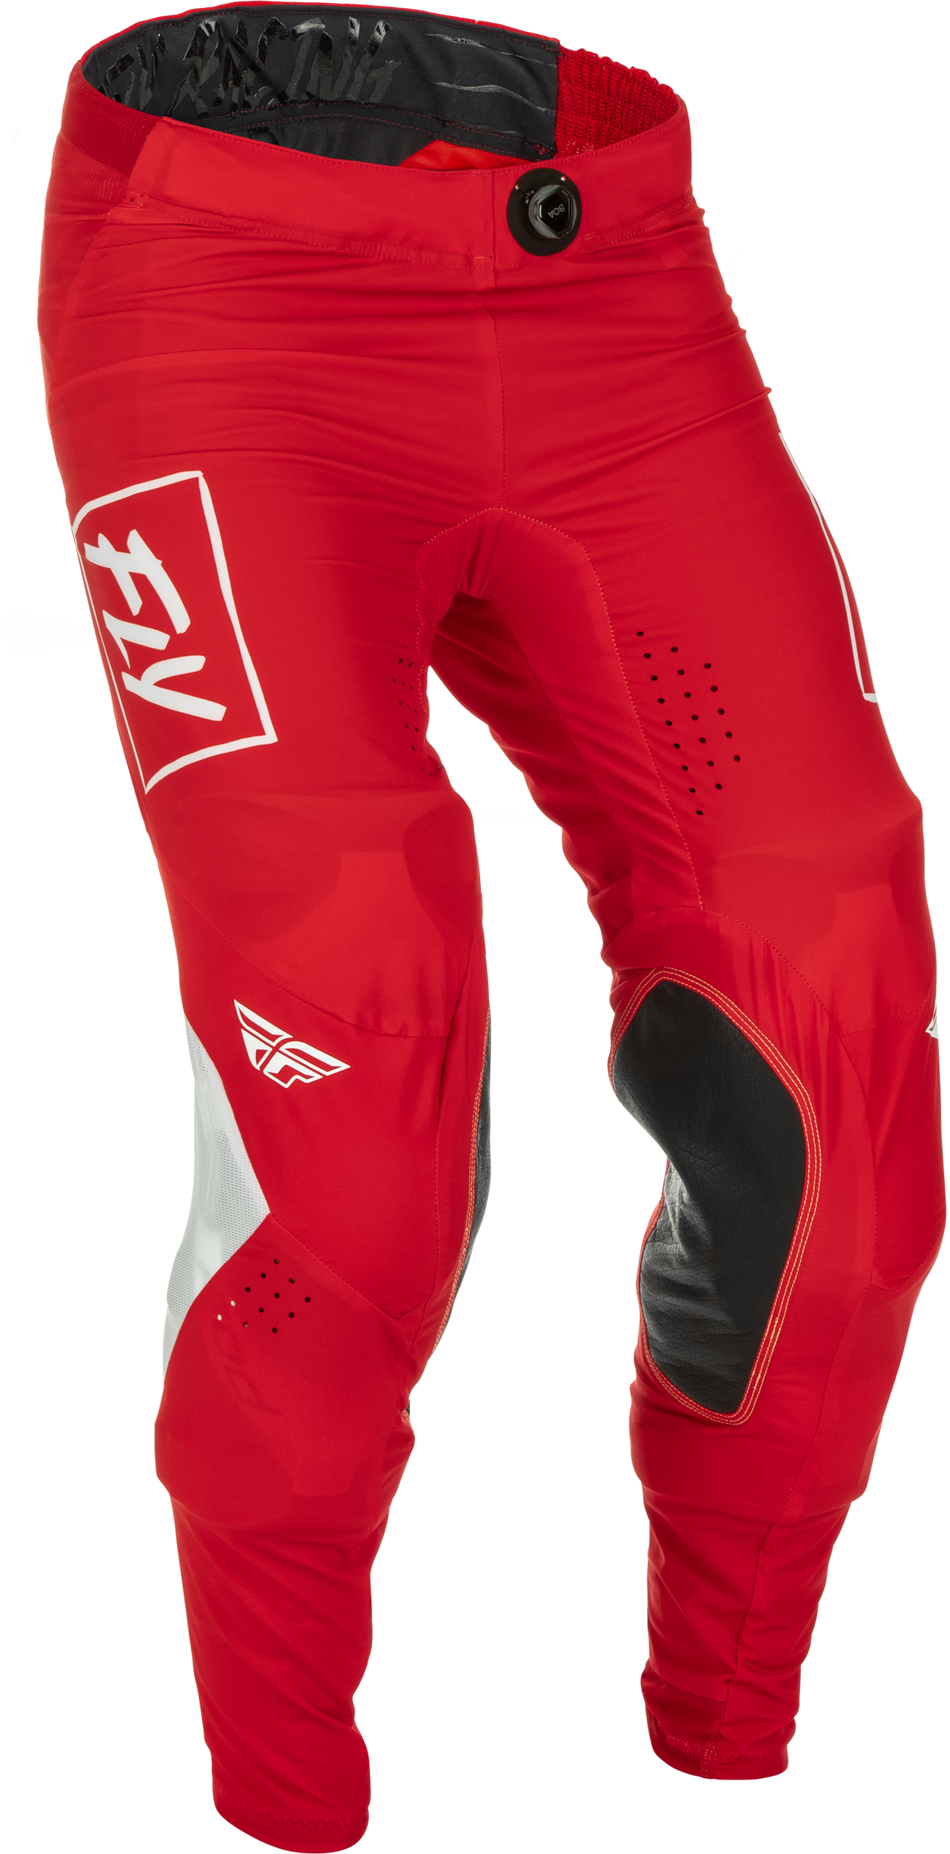 FLY RACING Lite Pants Red/White Size 34 375-73234